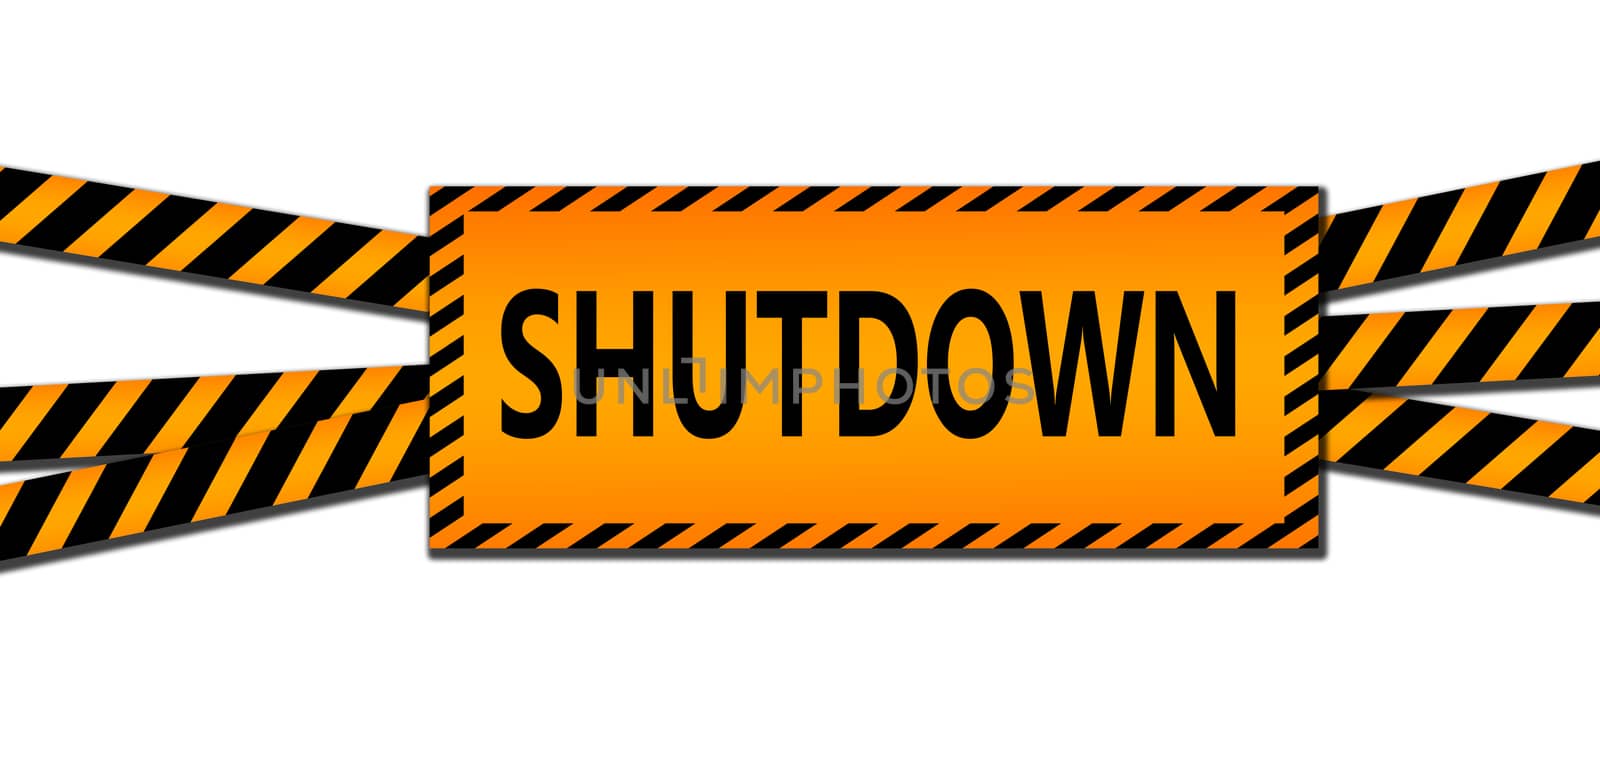 Shutdown sign between black and yellow striped ribbons isolated, 3d rendering